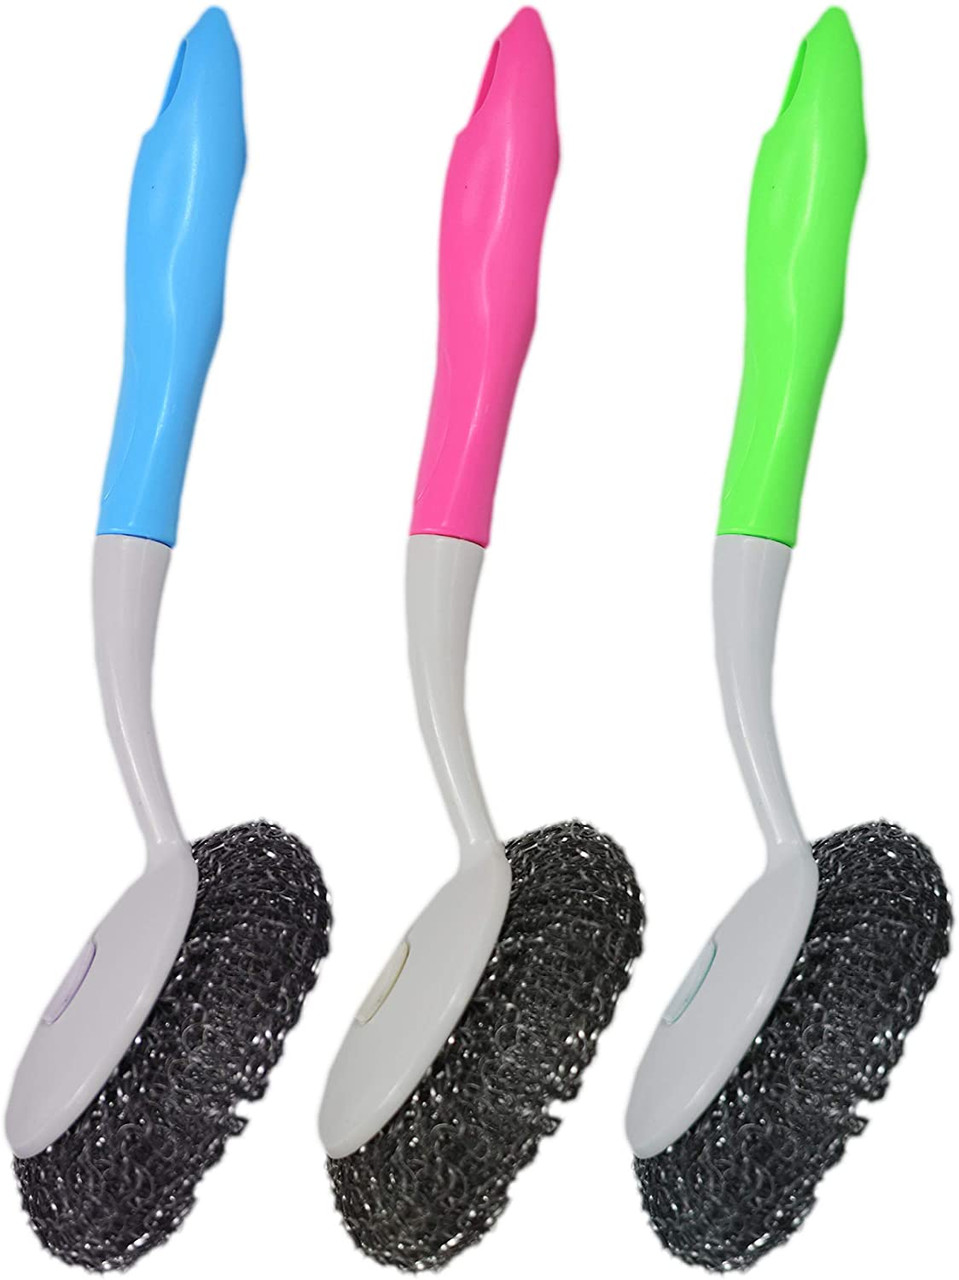 Set of Assorted Colored Scrub Brushes - Great for Vegetables, Dishes, and  More - Measures 5.5 X 3.5 - DIY Tool Supply